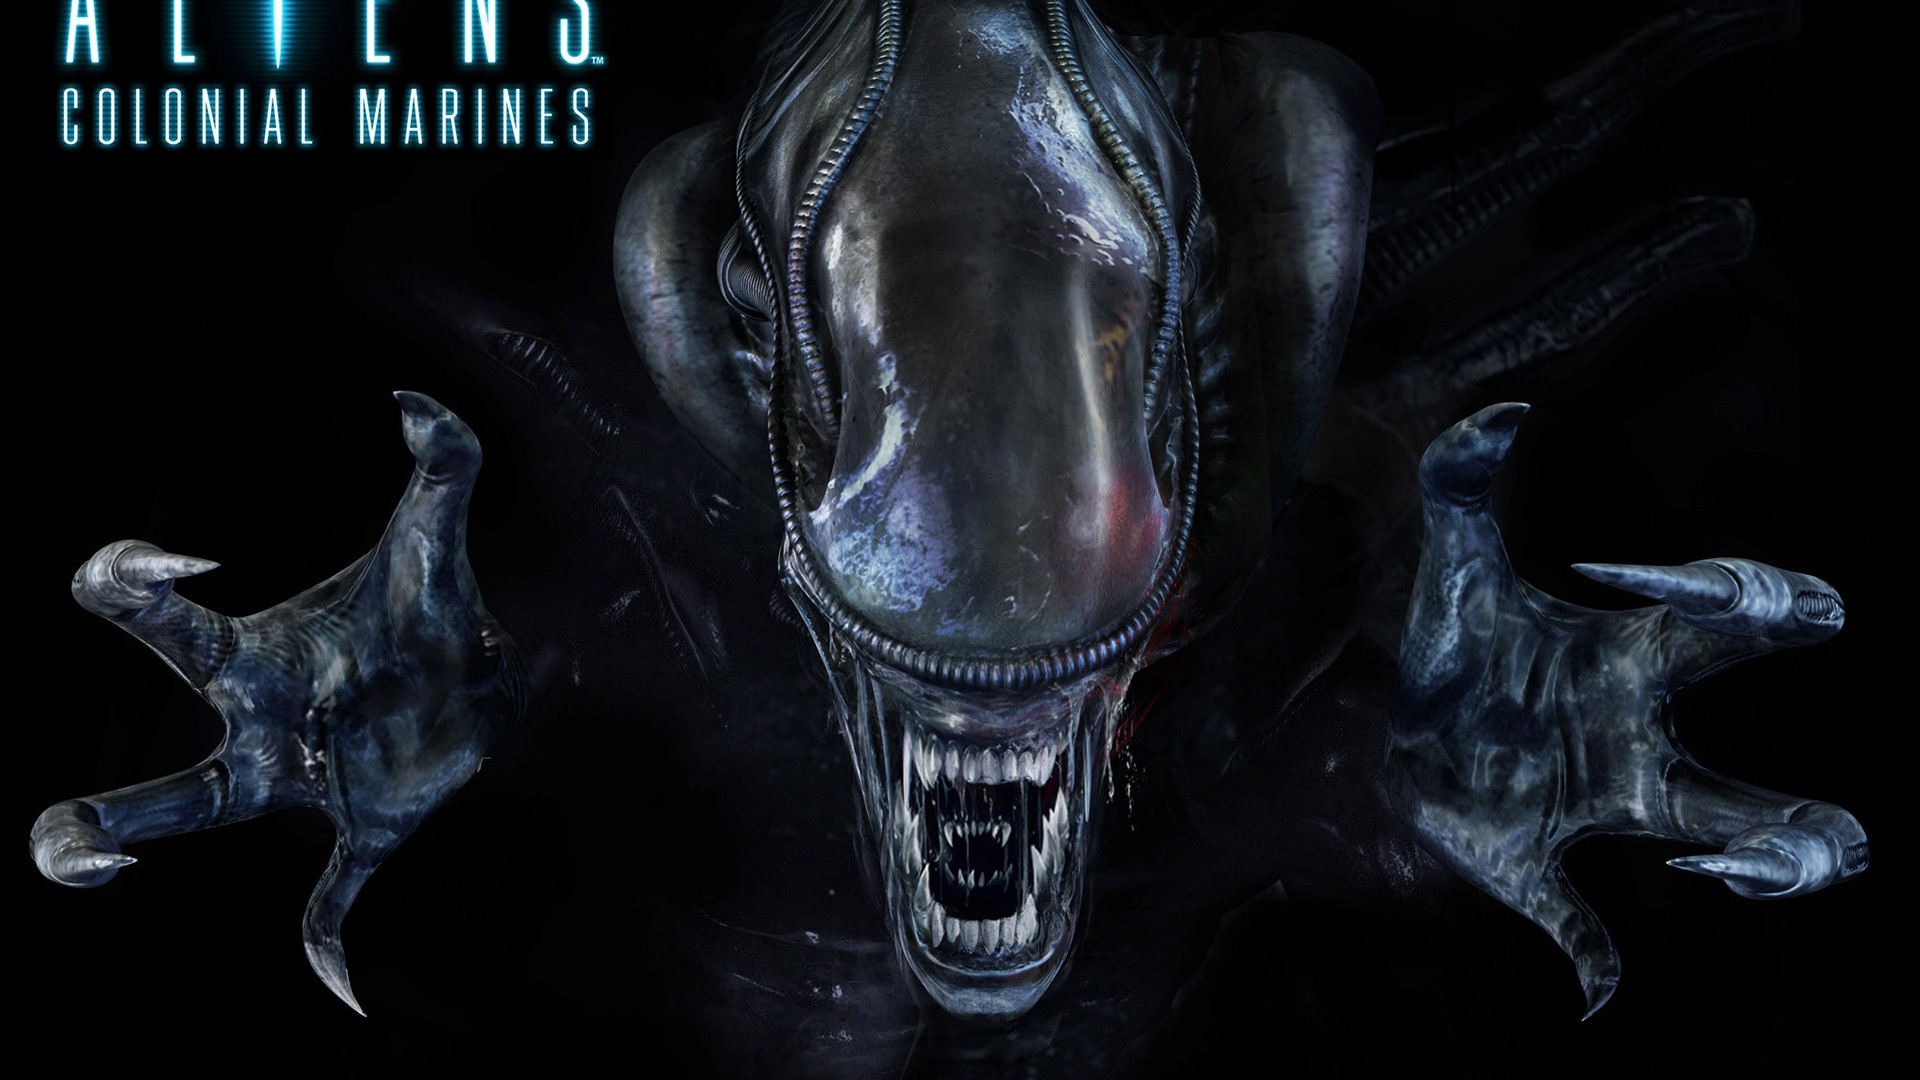 Alien: Isolation concept art is a precursor of horrors and calamities |  VG247